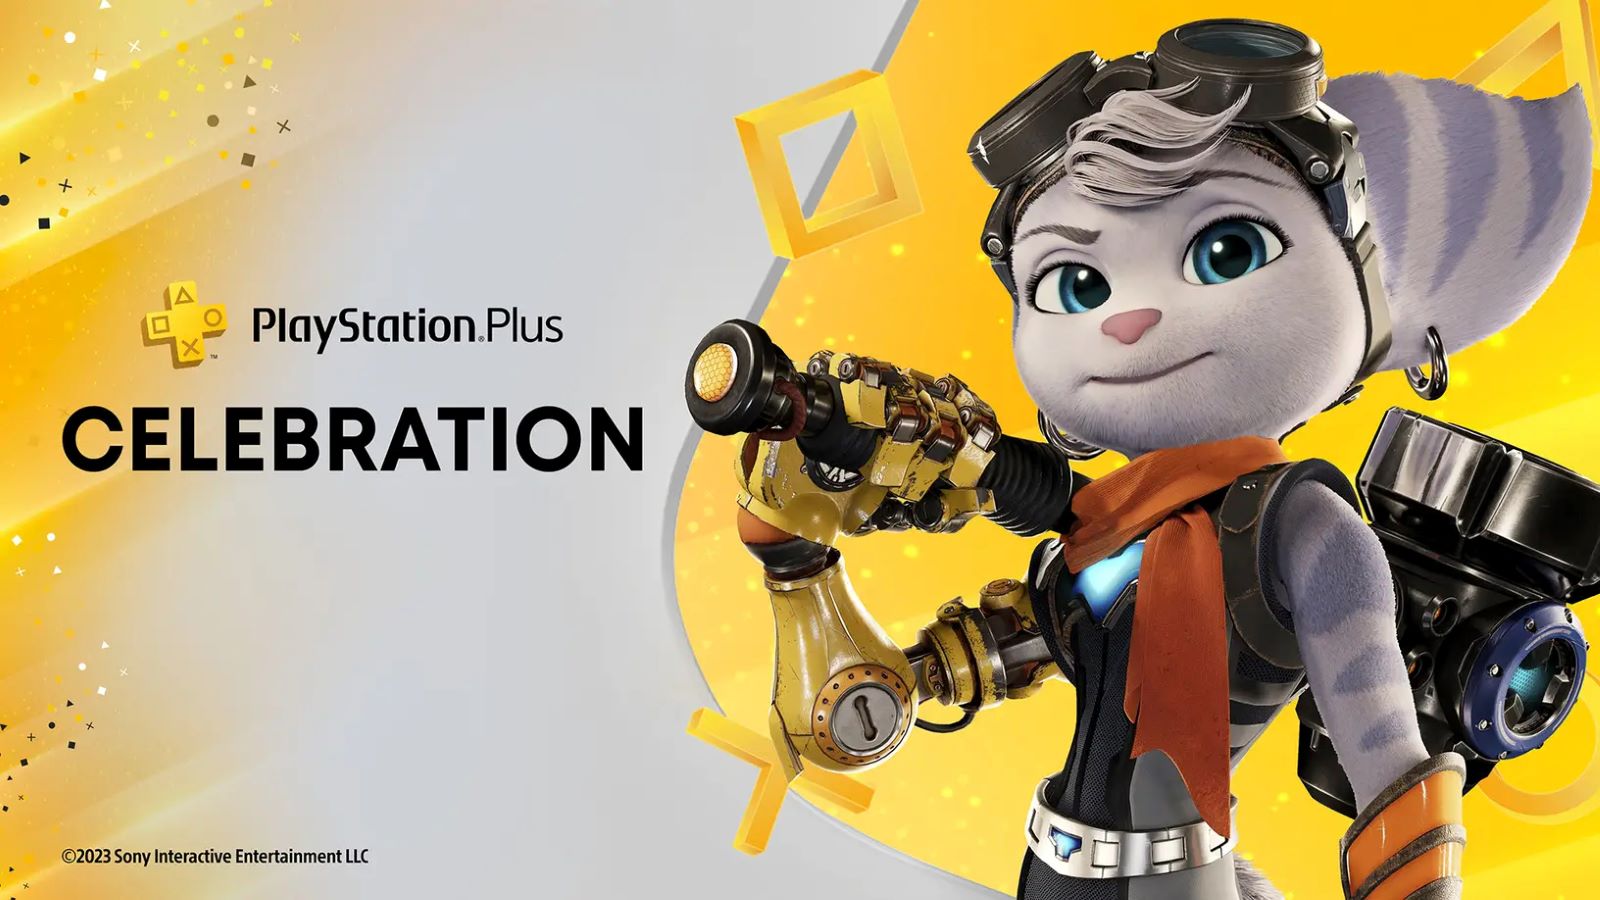 PlayStation Stars is launched in my country : r/PlayStationPlus